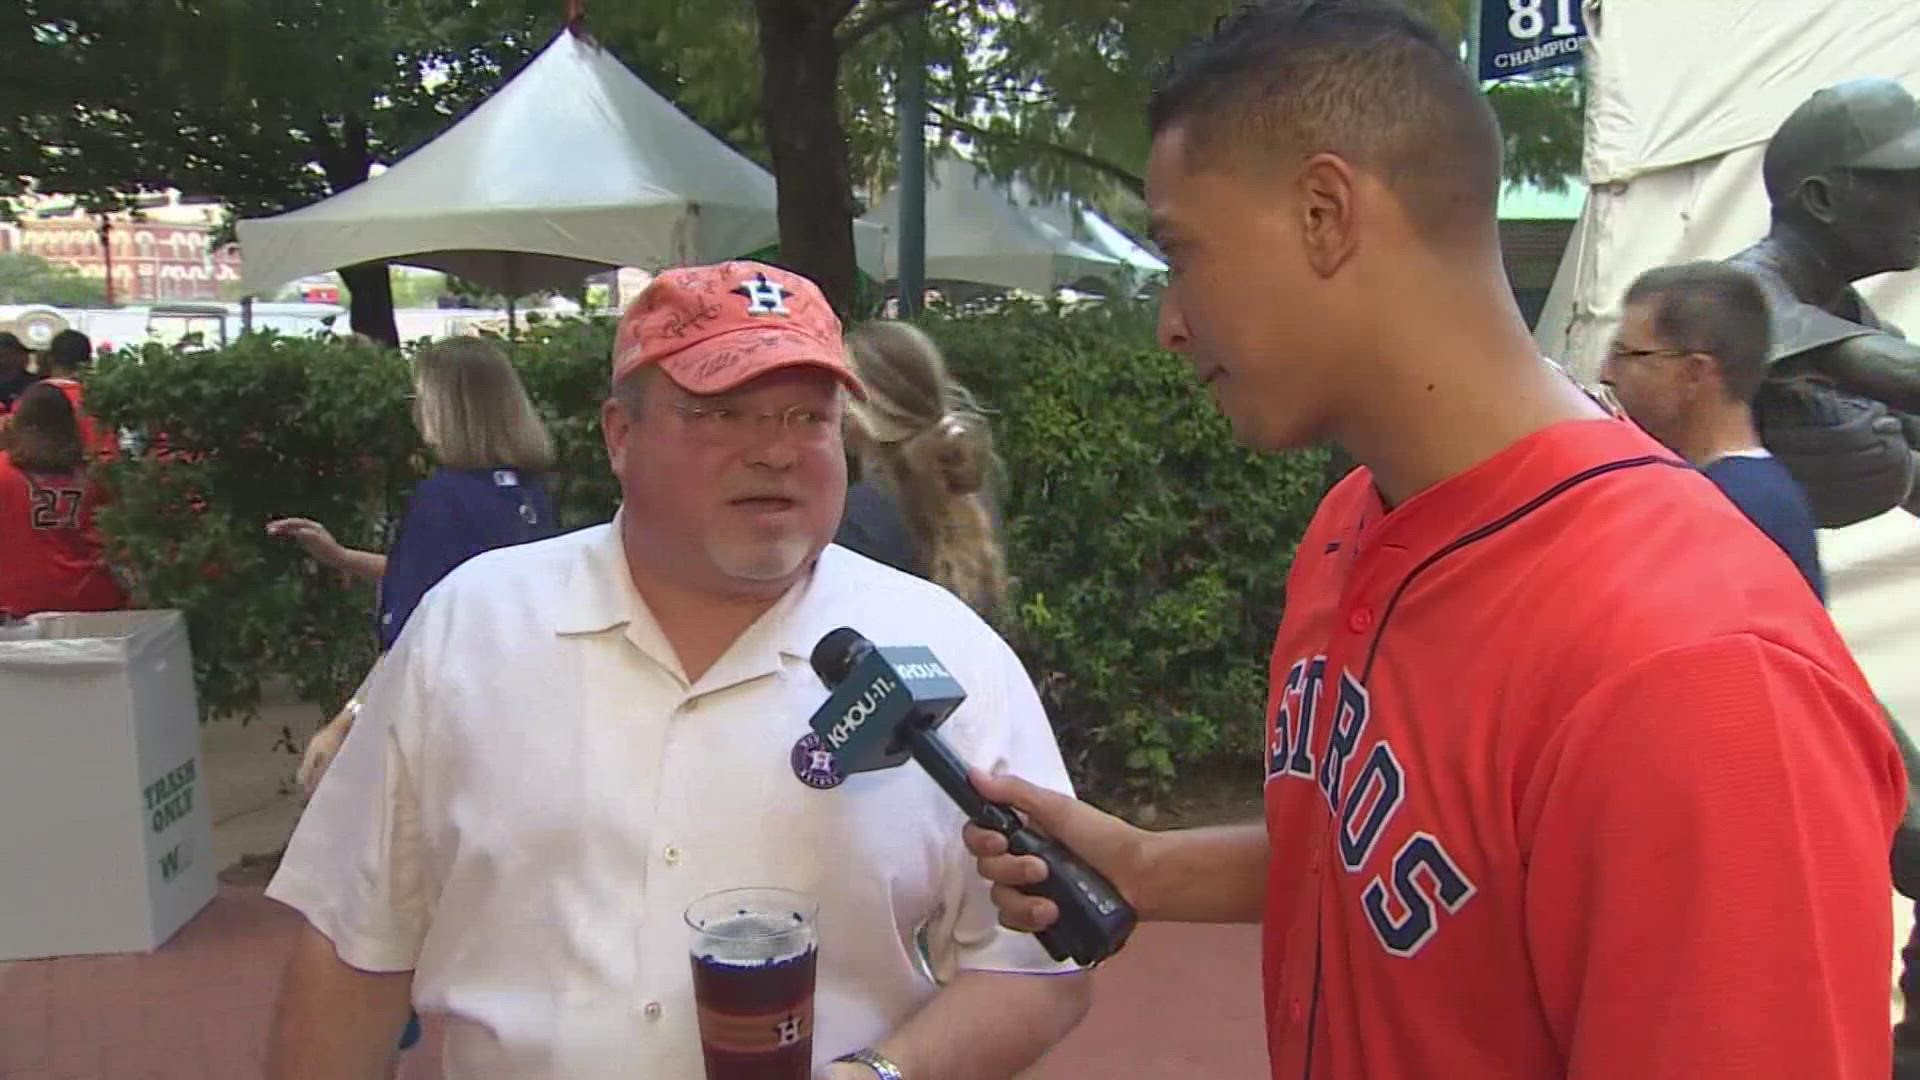 One thing's for certain and two things for sure, many Astros fans DO NOT want Carlos Correa going anywhere!